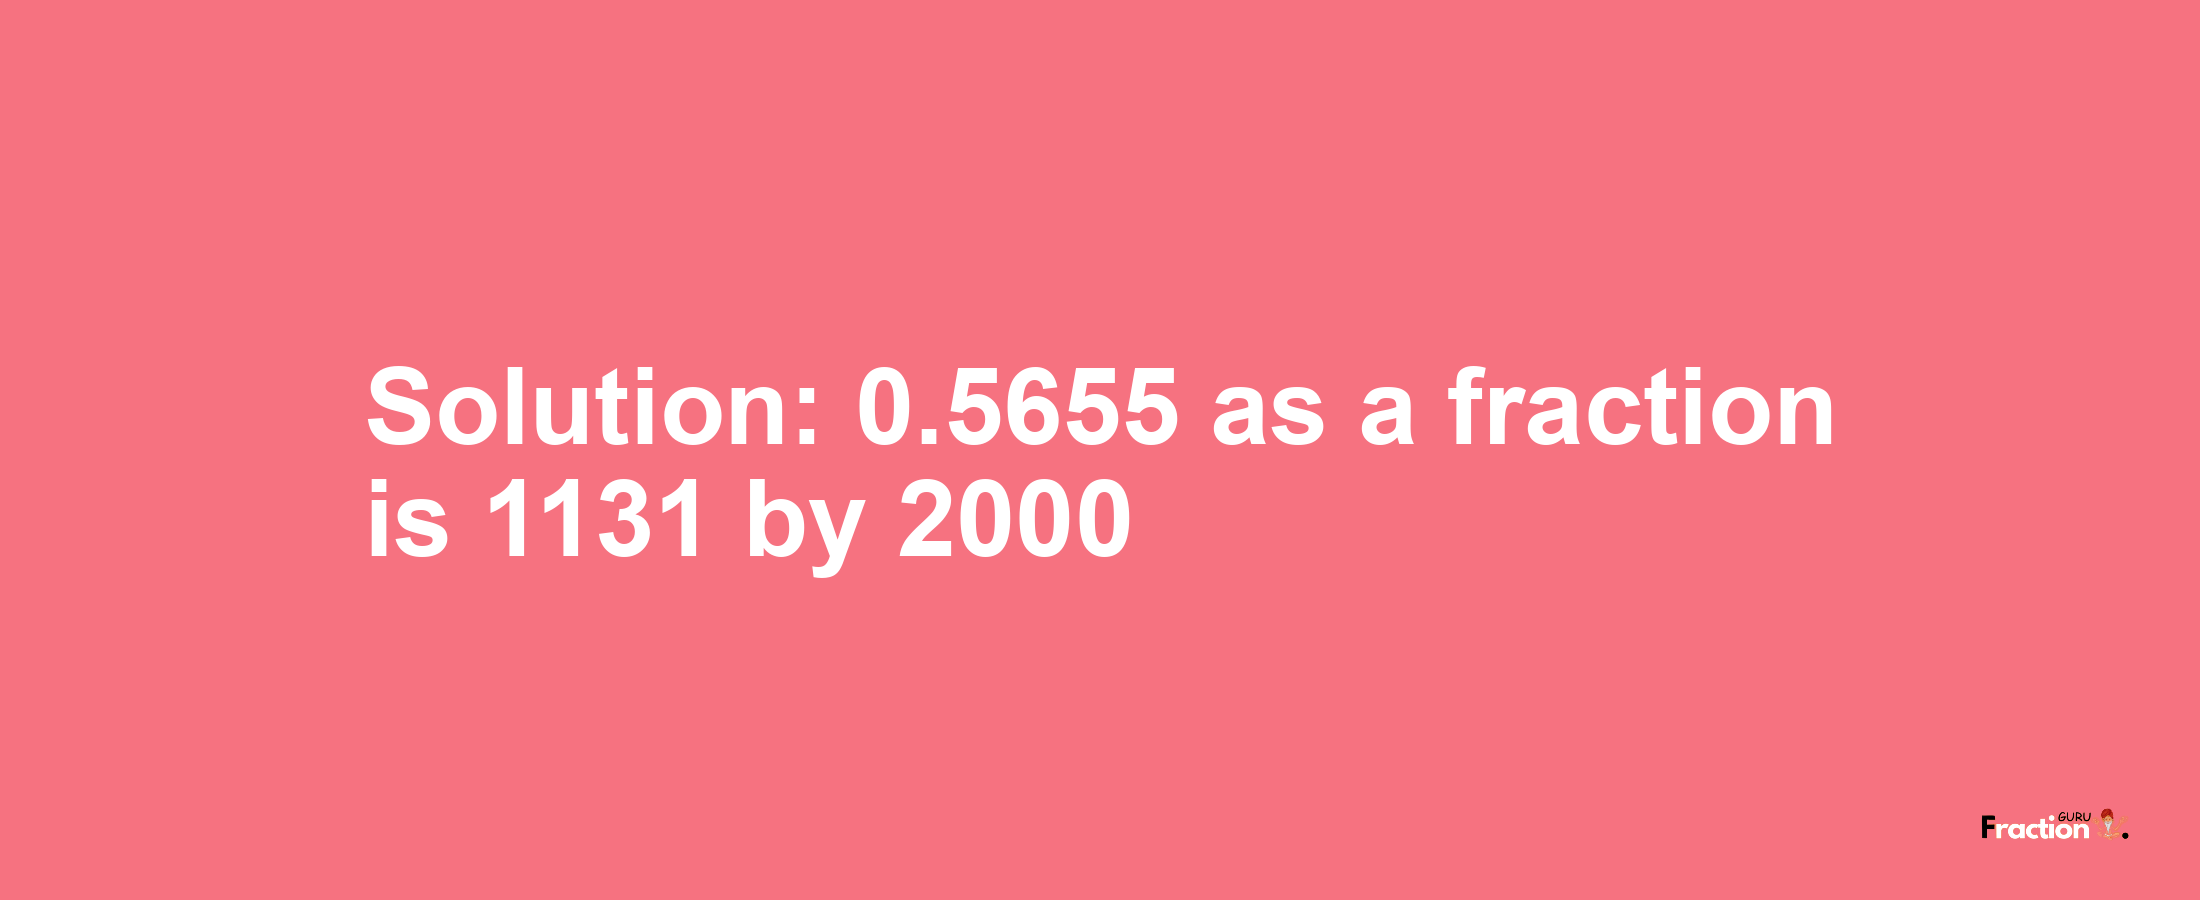 Solution:0.5655 as a fraction is 1131/2000